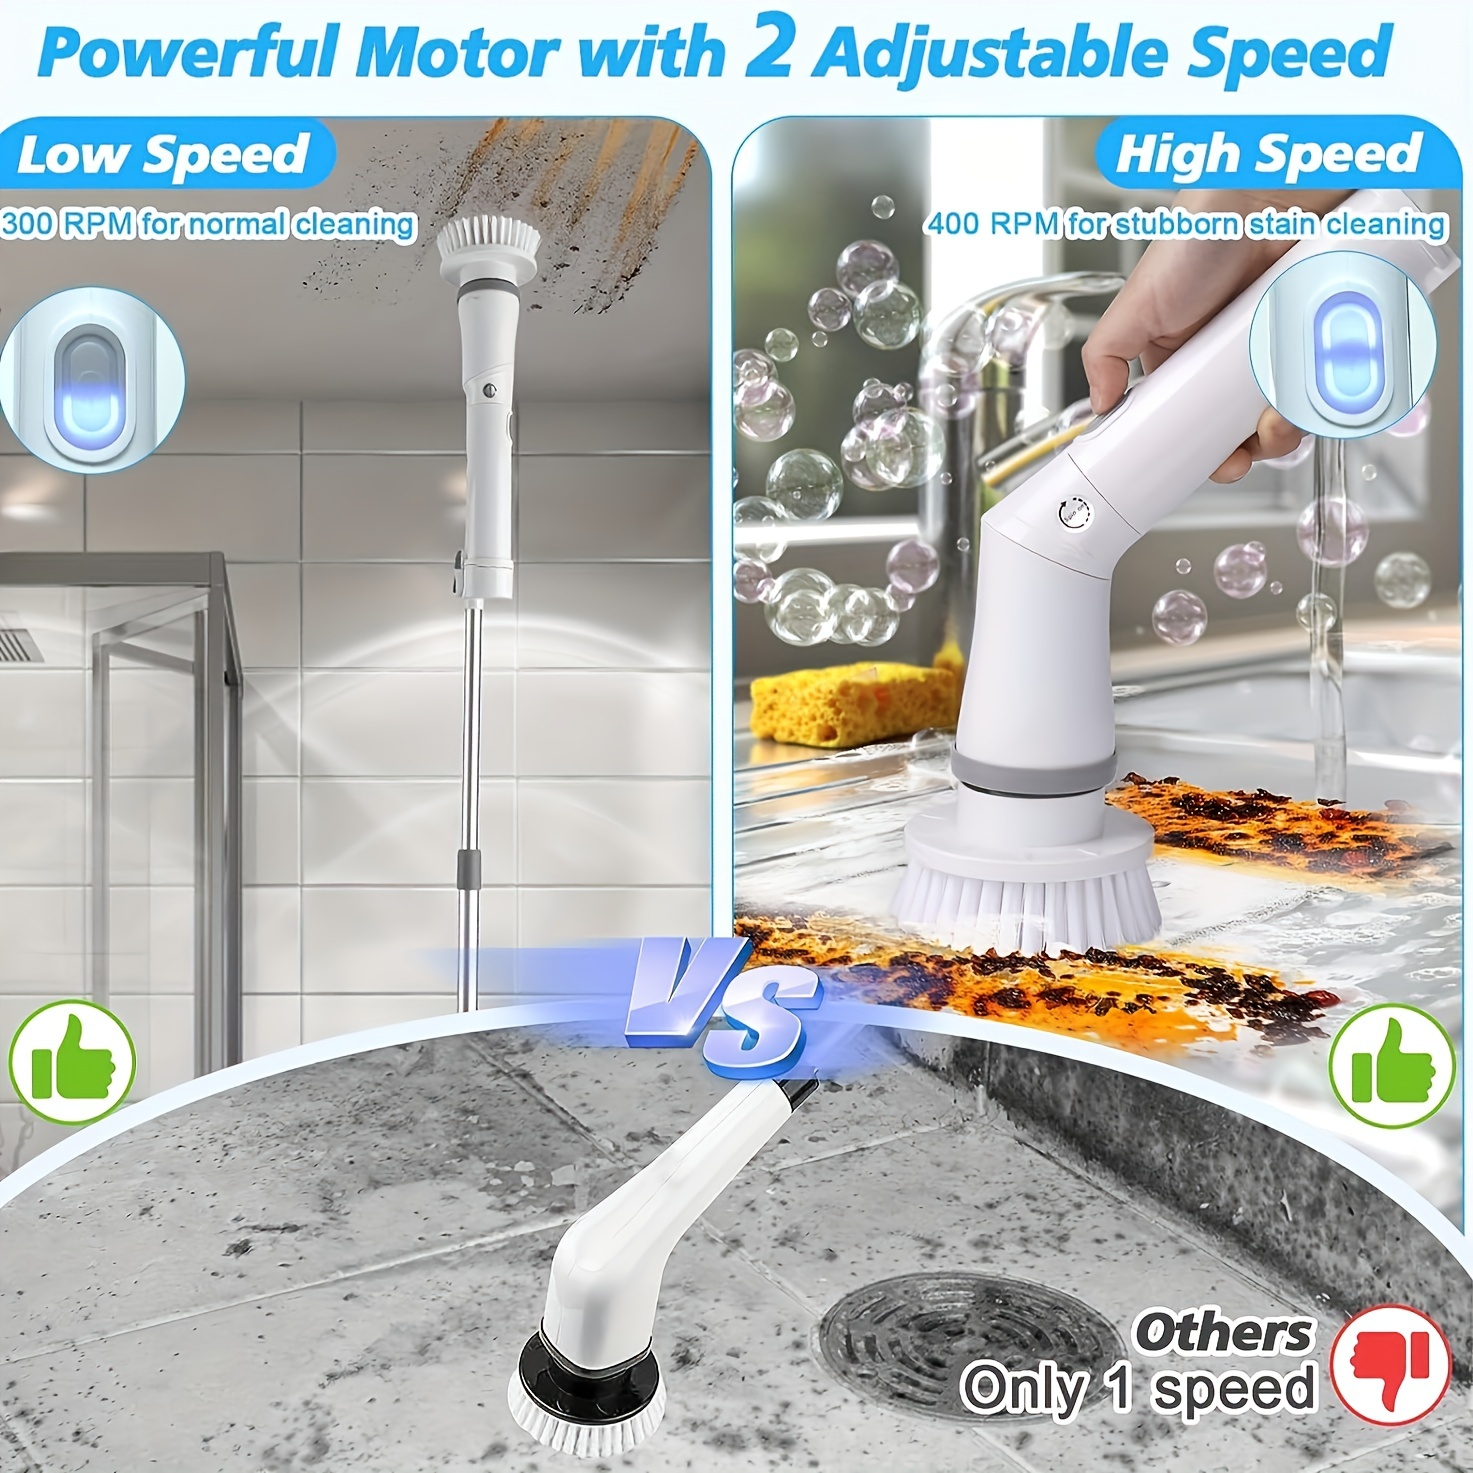  Cordless Electric Scrubber, Power Spin Scrubber, Handheld Power  Scrubber with 4 Spin Scrubber Brushes Heads for Tiles,Showers, Bathroom,  Windows, Kitchen (Lightweight and Heavy-Duty : Health & Household